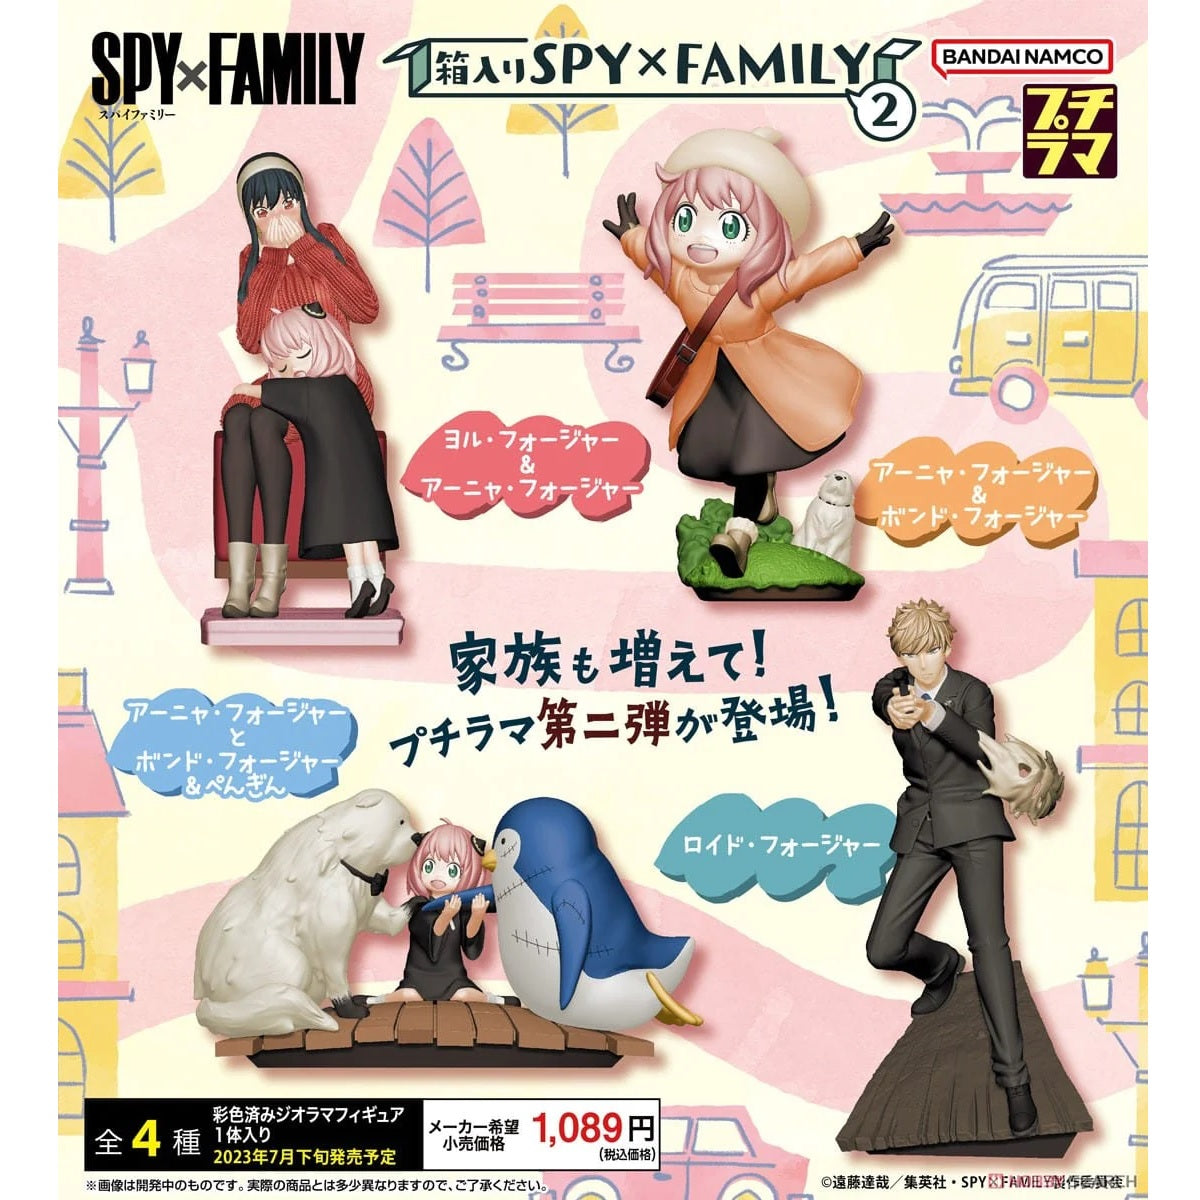 Spy x Family: Petitrama Series "Spy x Family in the Box"-Single (Random)-MegaHouse-Ace Cards & Collectibles